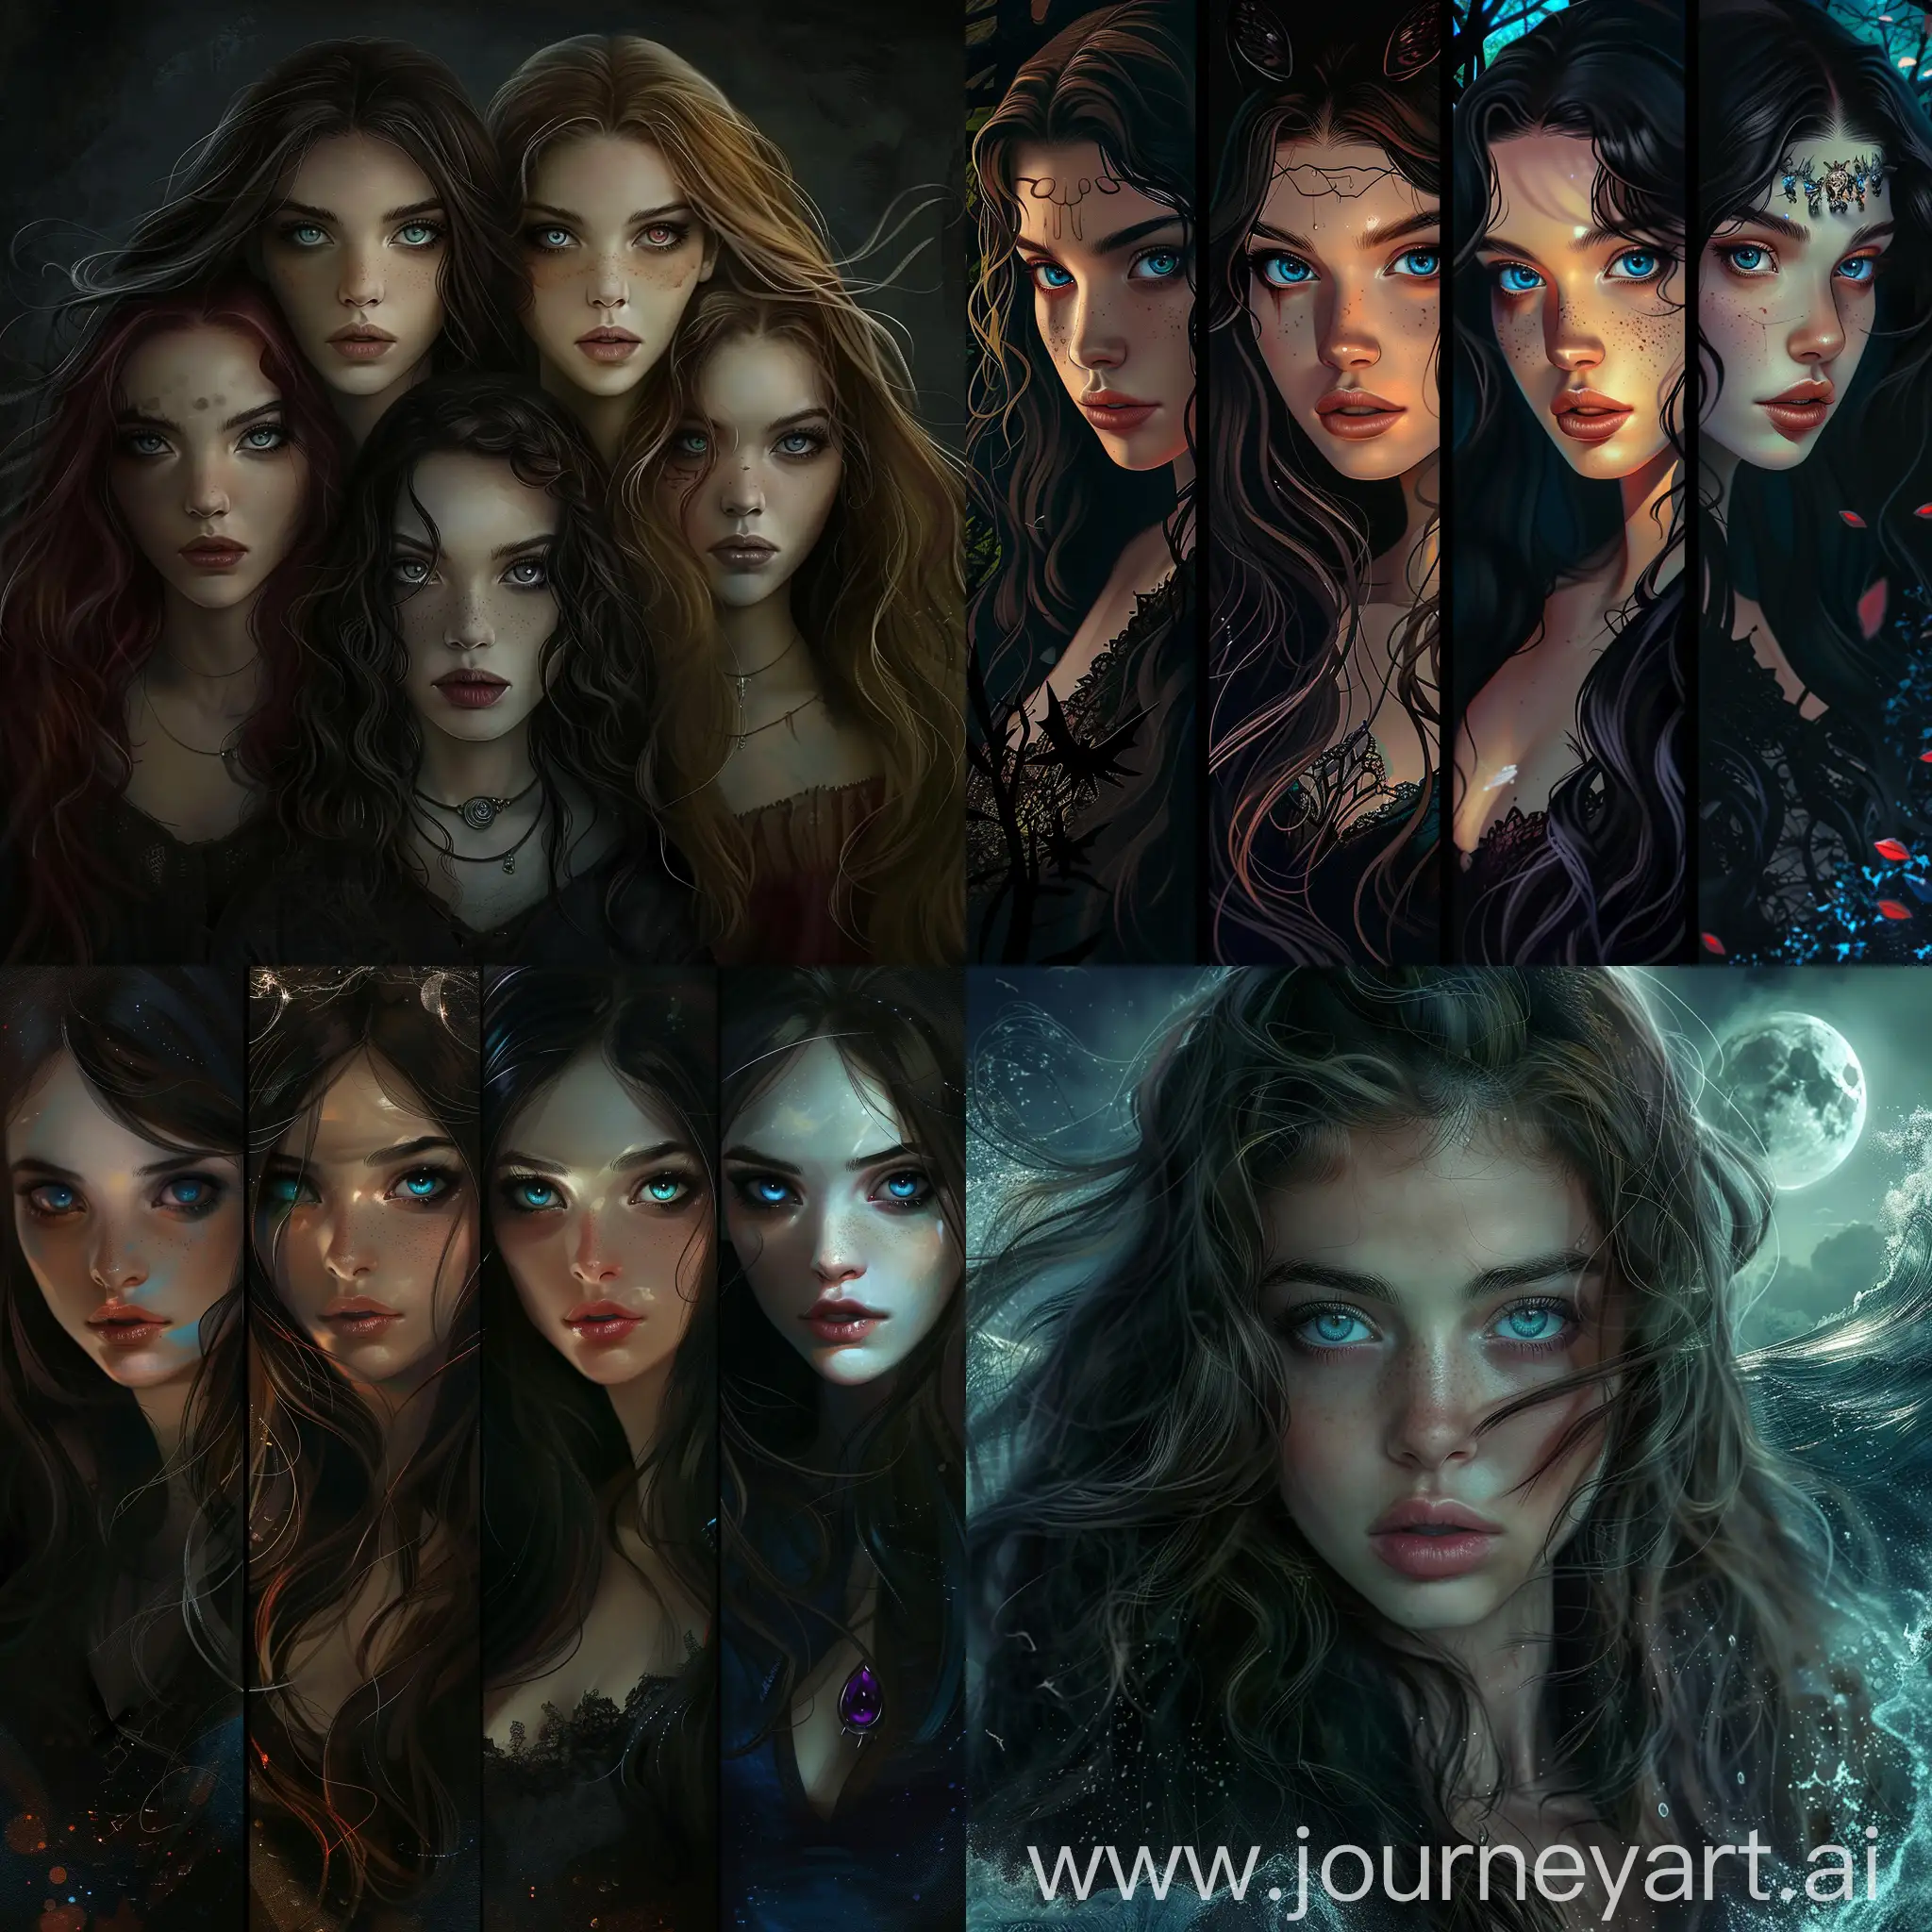  teenager girl with long brunette mane of hair and blue eyes with her full body as a mermaid with her full body, as a vampire with her full body, as a witch with her full body, and a werewolf with her full body